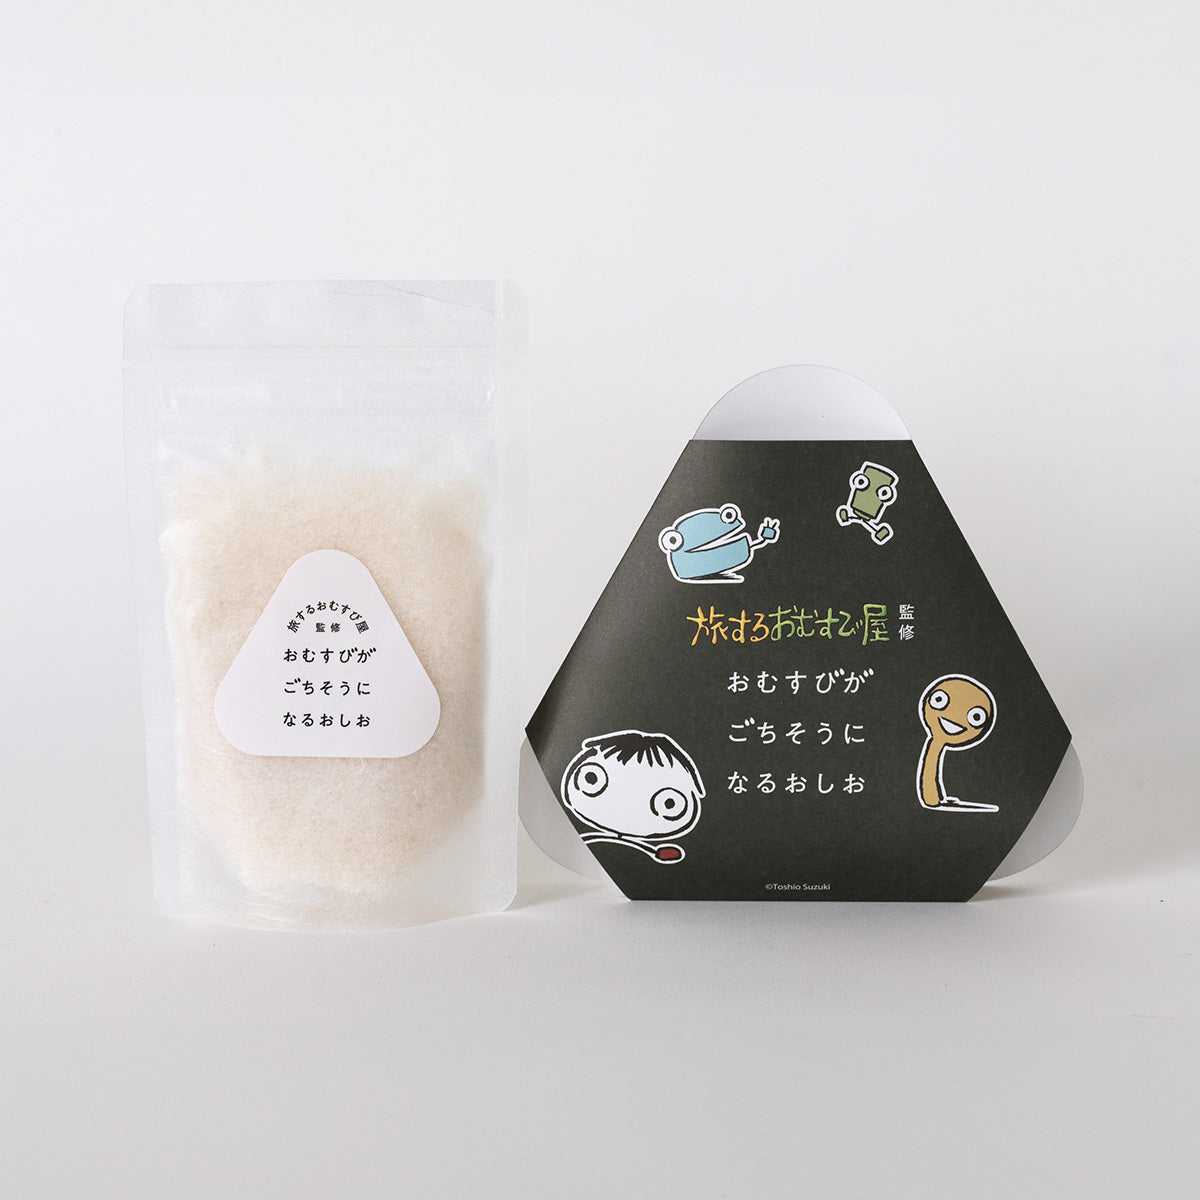 [Scheduled to go on sale on July 13th] Oshio [seaweed] that makes rice balls a treat